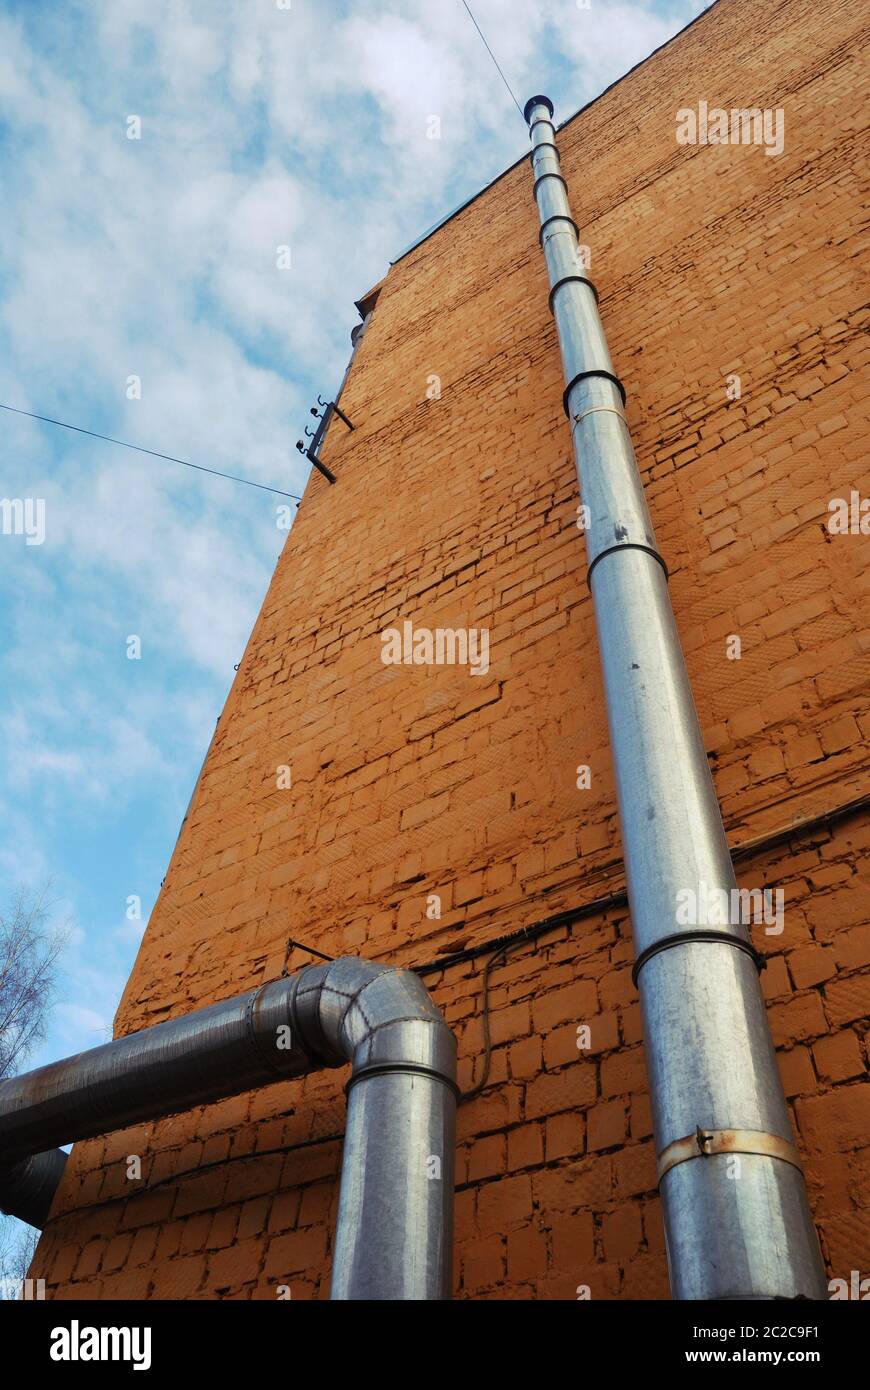 two ventilation pipes on a brick wall Stock Photo